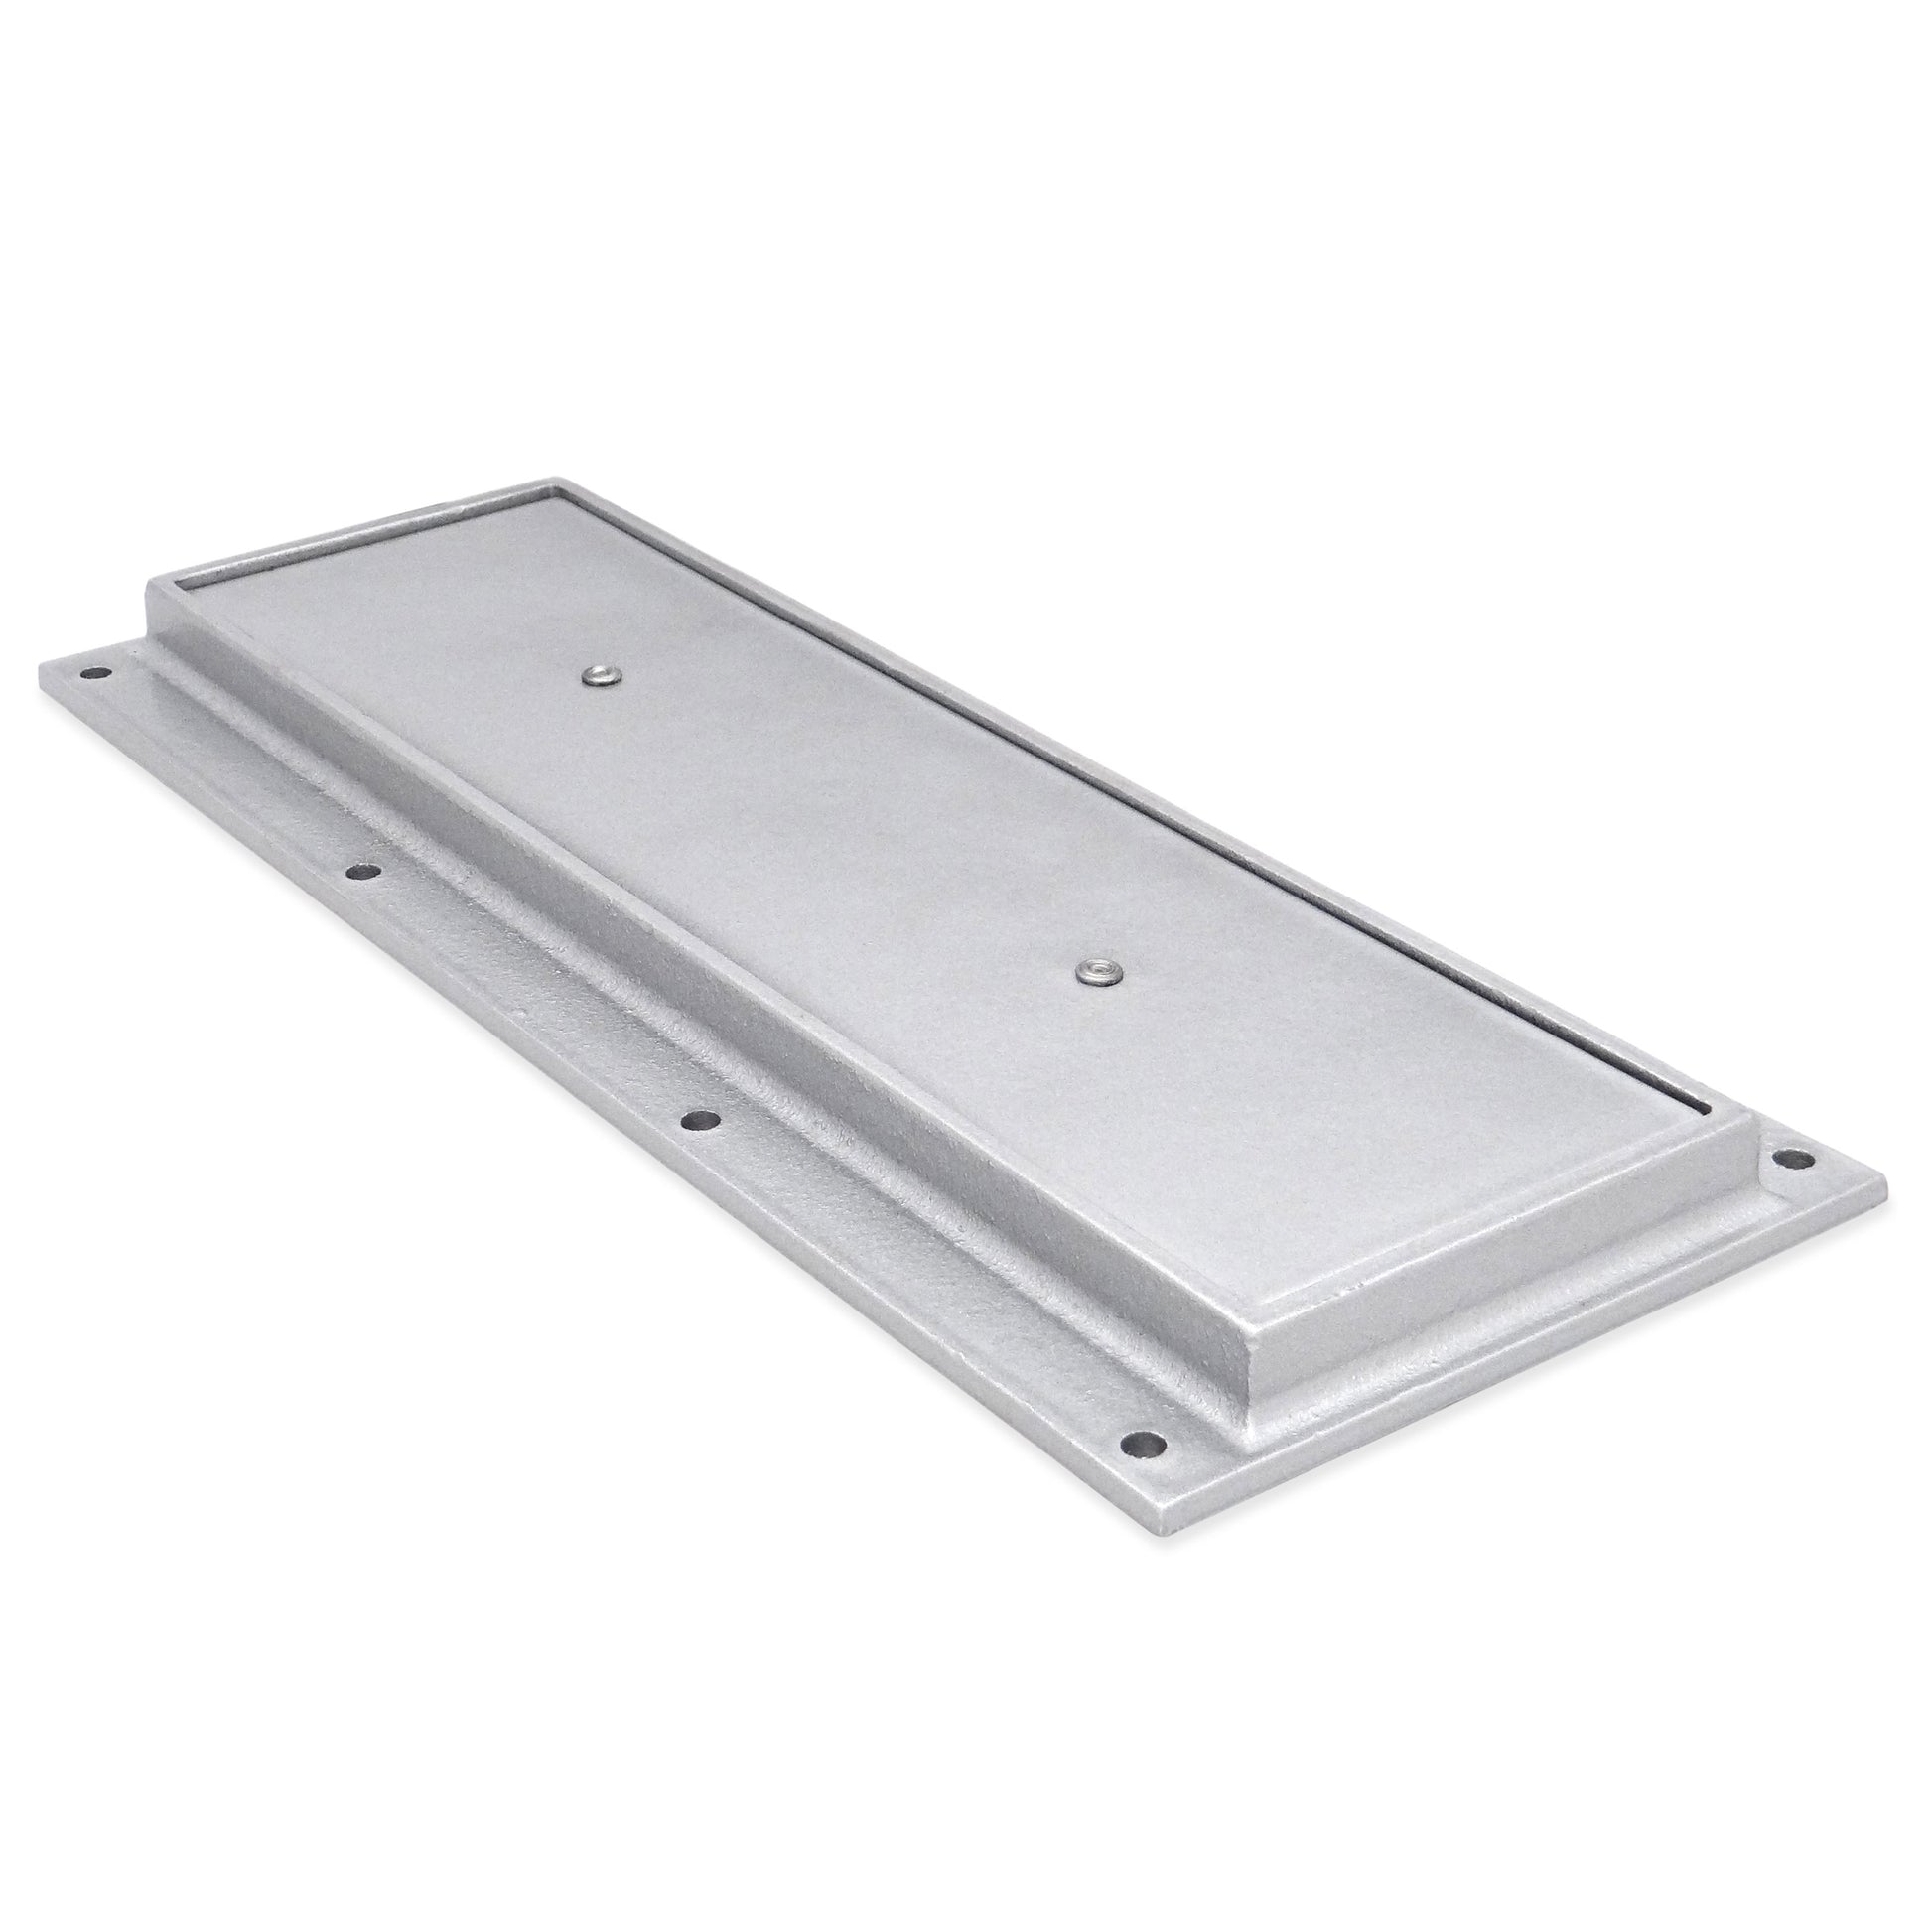 Load image into Gallery viewer, PMA1850 Light-Duty Plate Magnet - 45 Degree Angle View